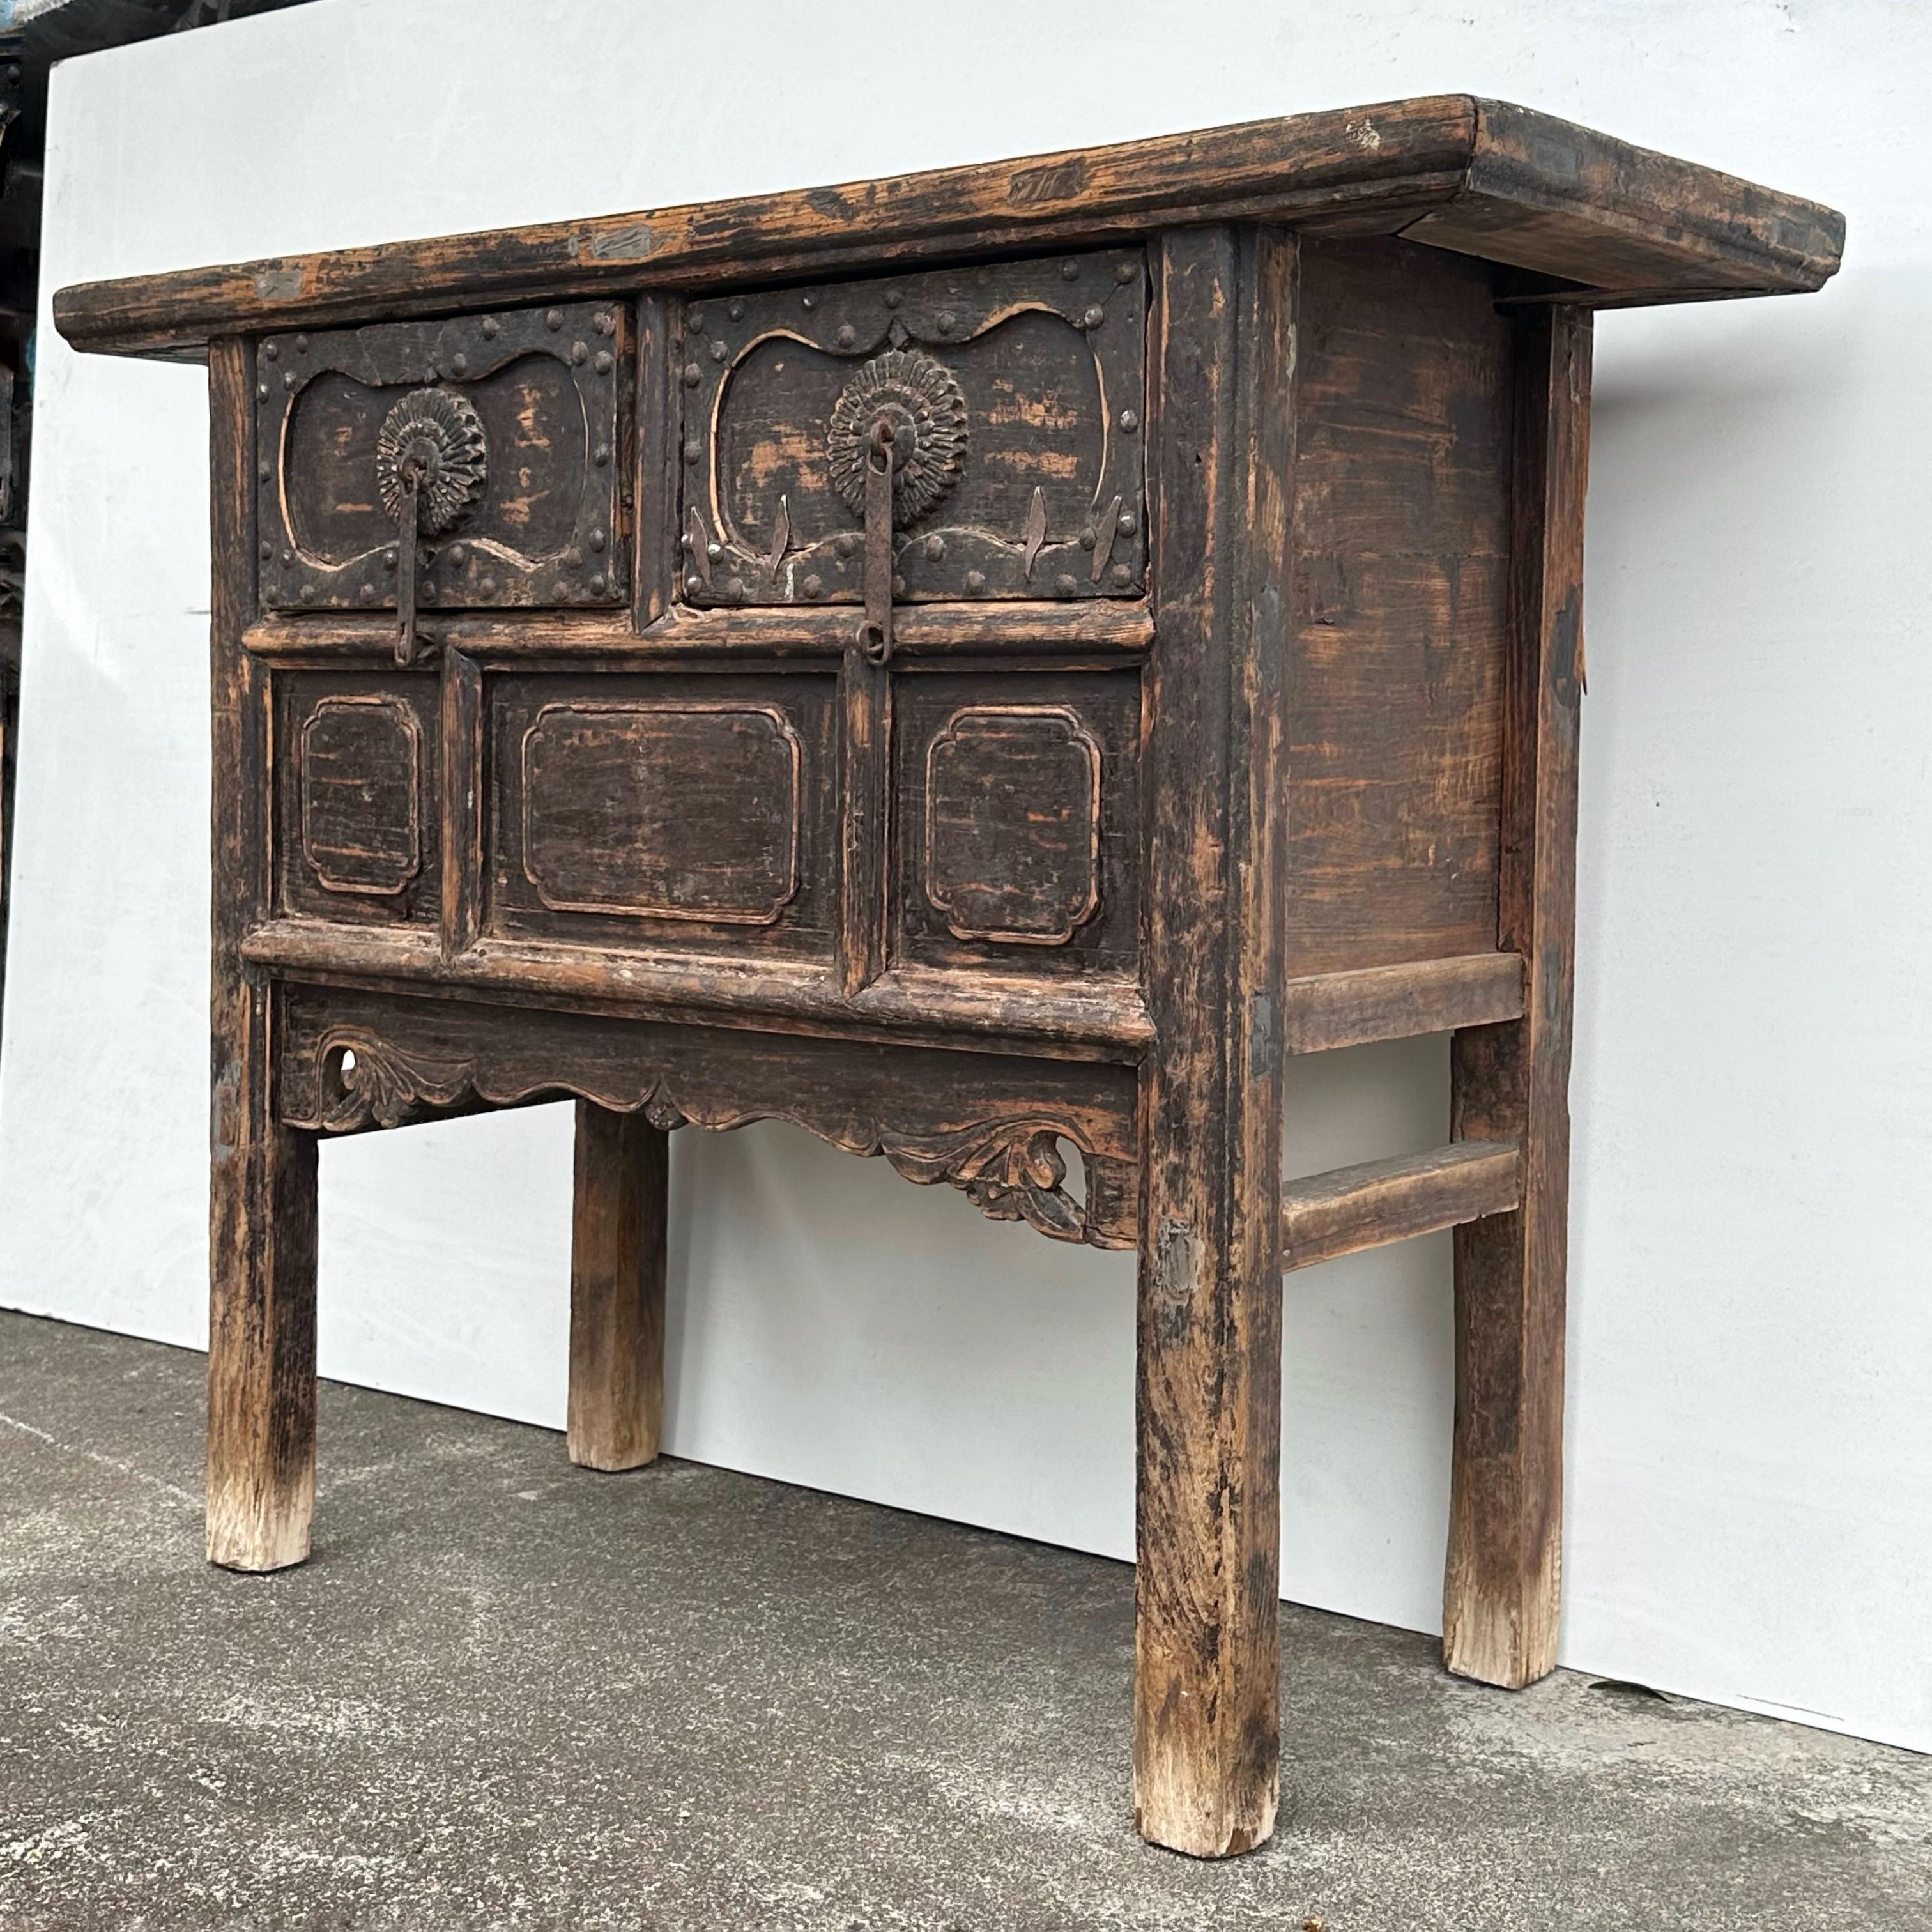 This antique coffer table from Shanxi has exceptional patina, harmonious proportions and pleasing overall aesthetics. On the drawers are cast iron handles with beautifully carved chrysanthemum flower backings, and iron studs framing the perimeter.